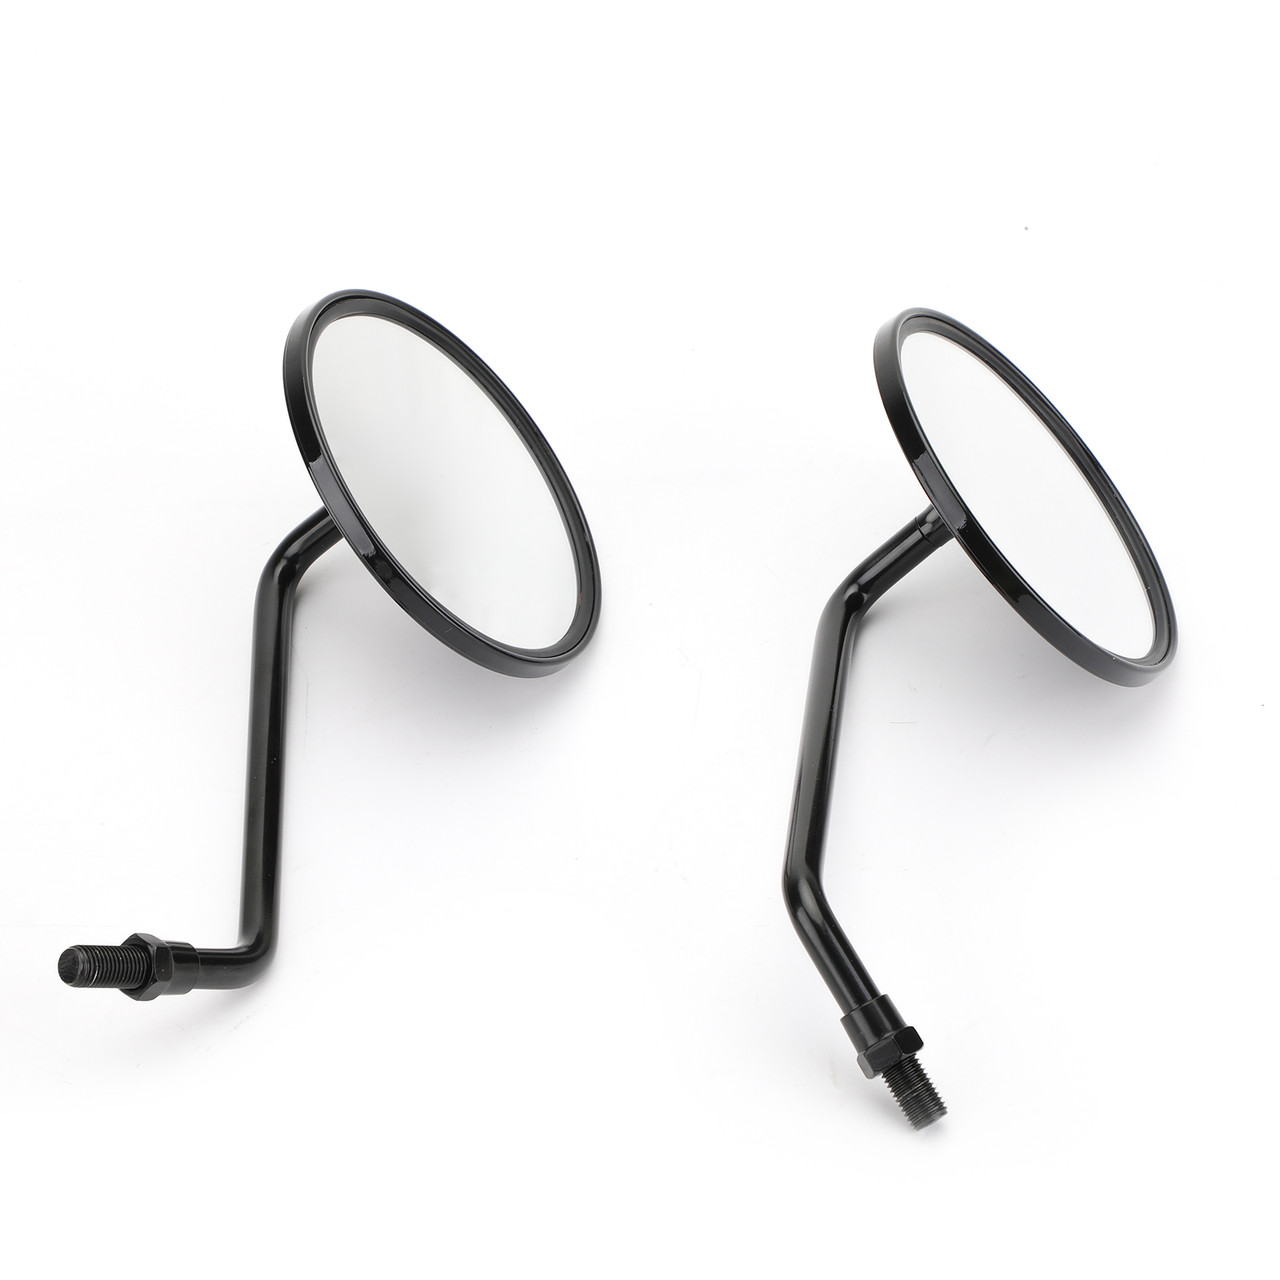 Pair of 10MM-CW Mirrors fits For Kawasaki with 10MM(CW) threads Black~BC3